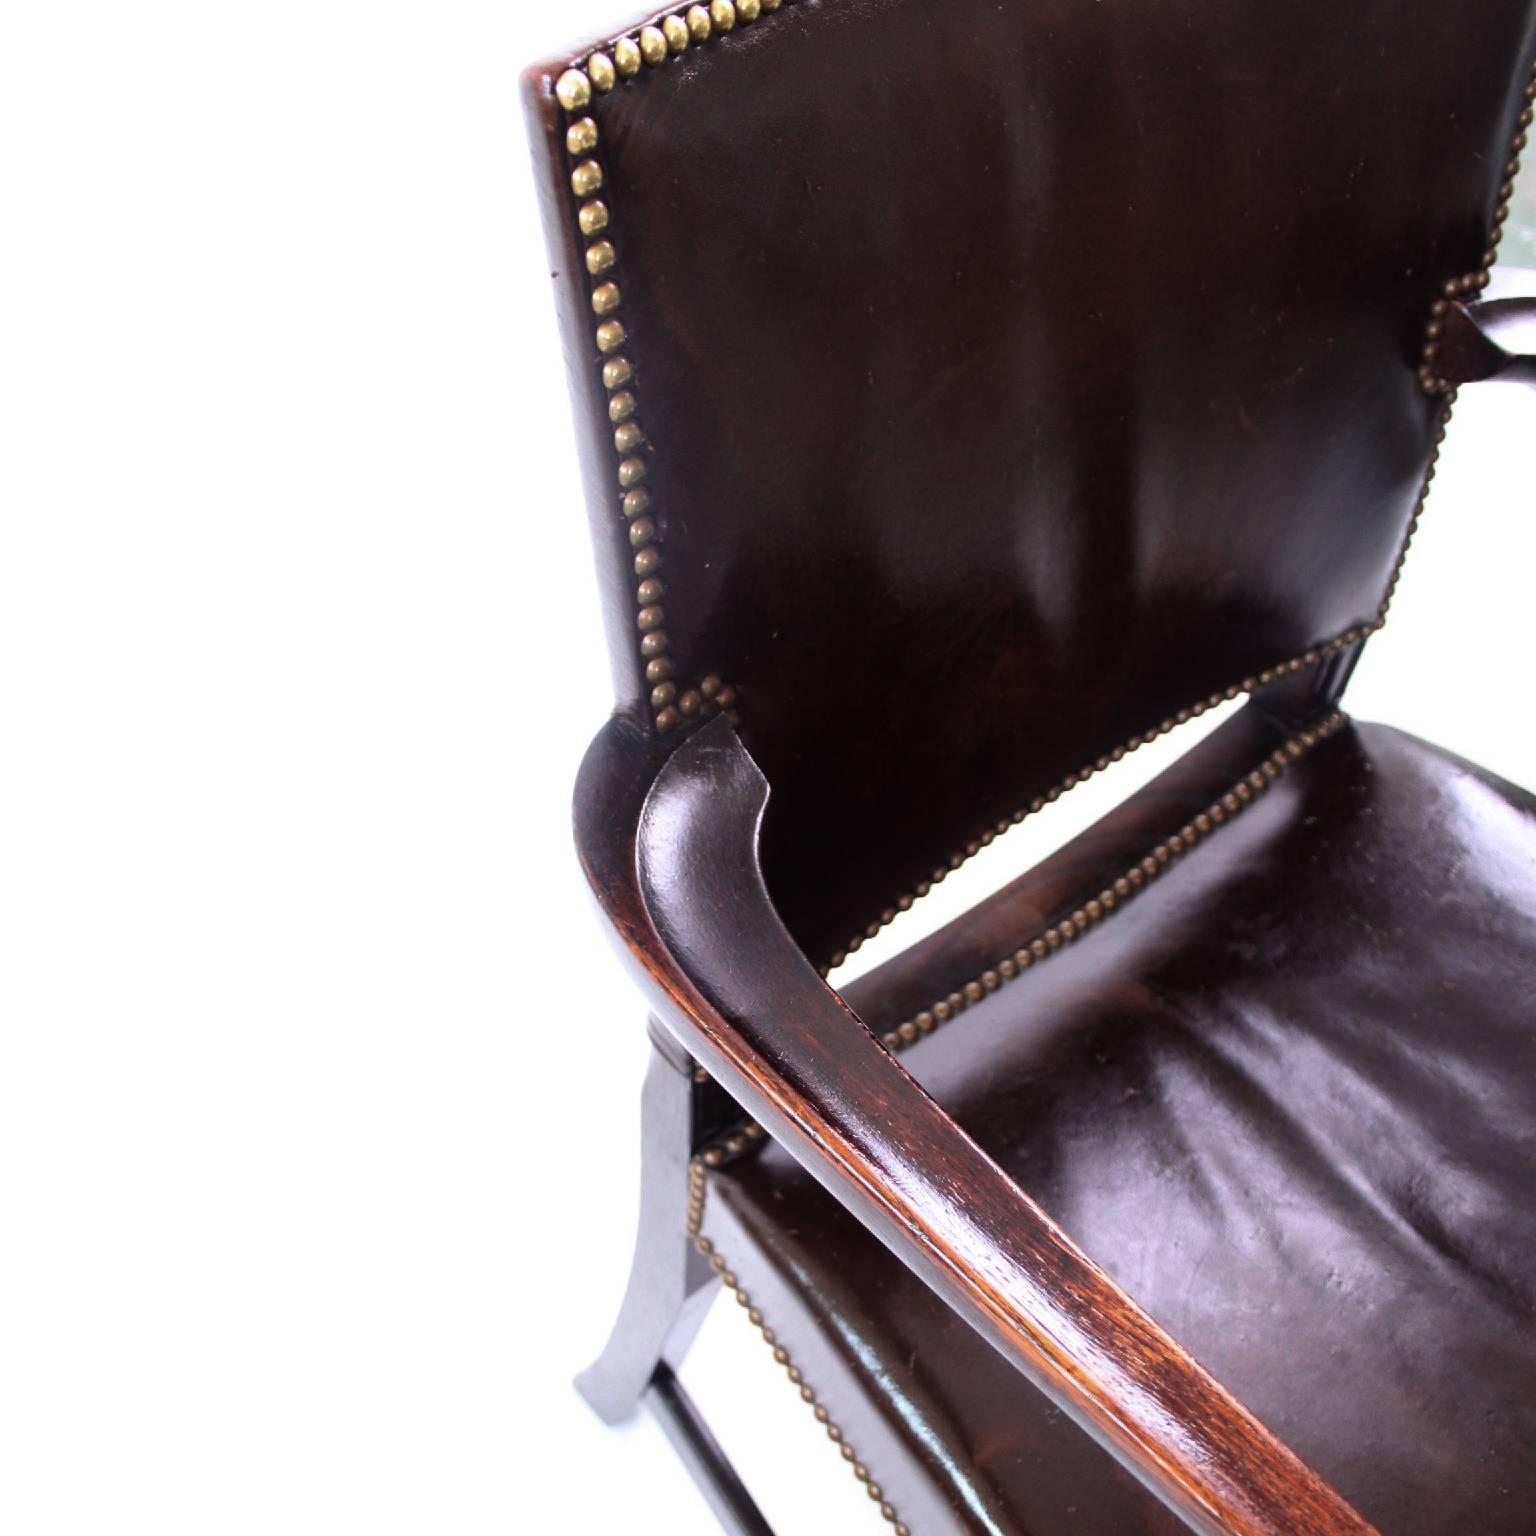 Stained Kaare Klint 'Red Armchair' in Dark Brown Leather and Dark Oak Frame, 1940s For Sale